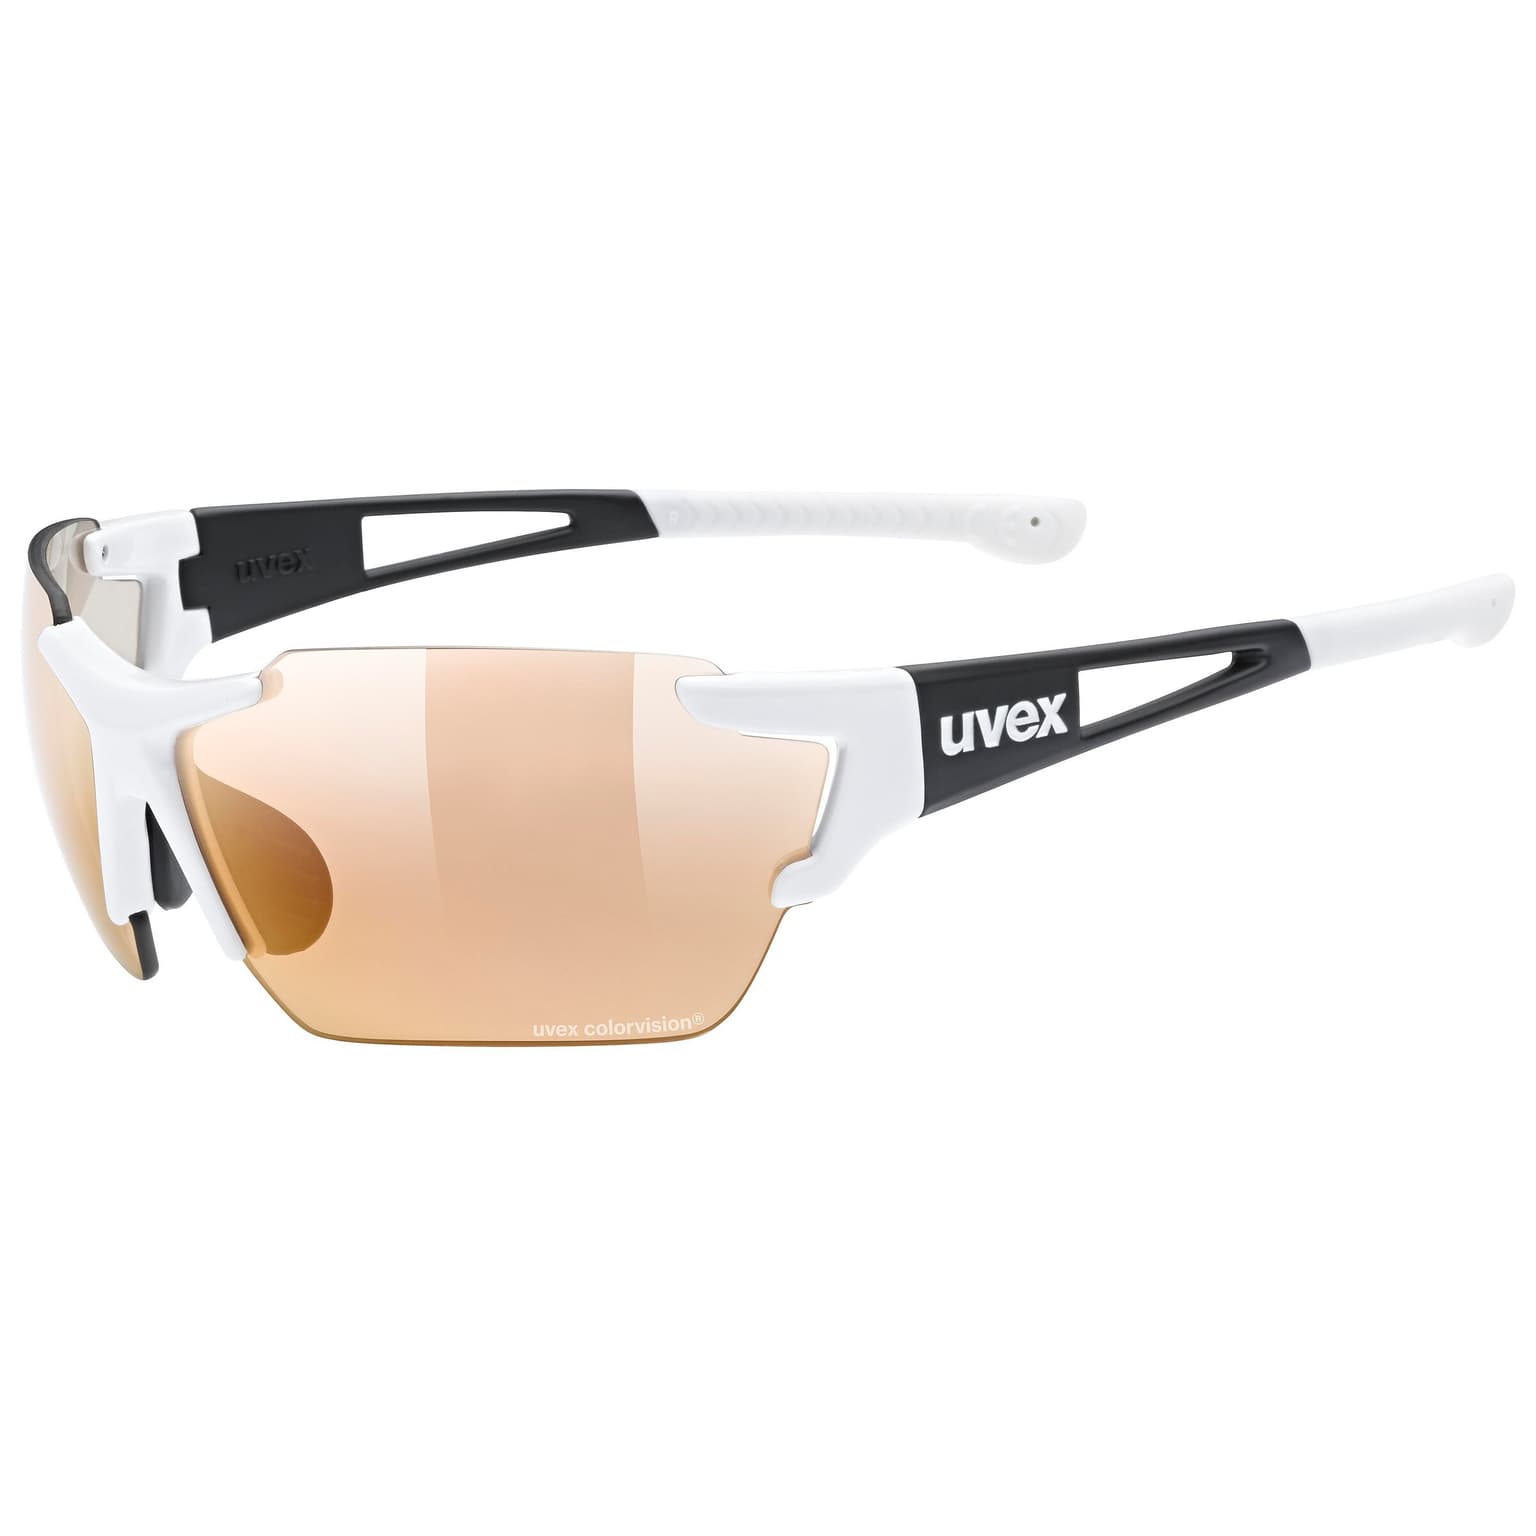 Uvex Uvex Sportstyle 803 race CV V Sportbrille weiss 1